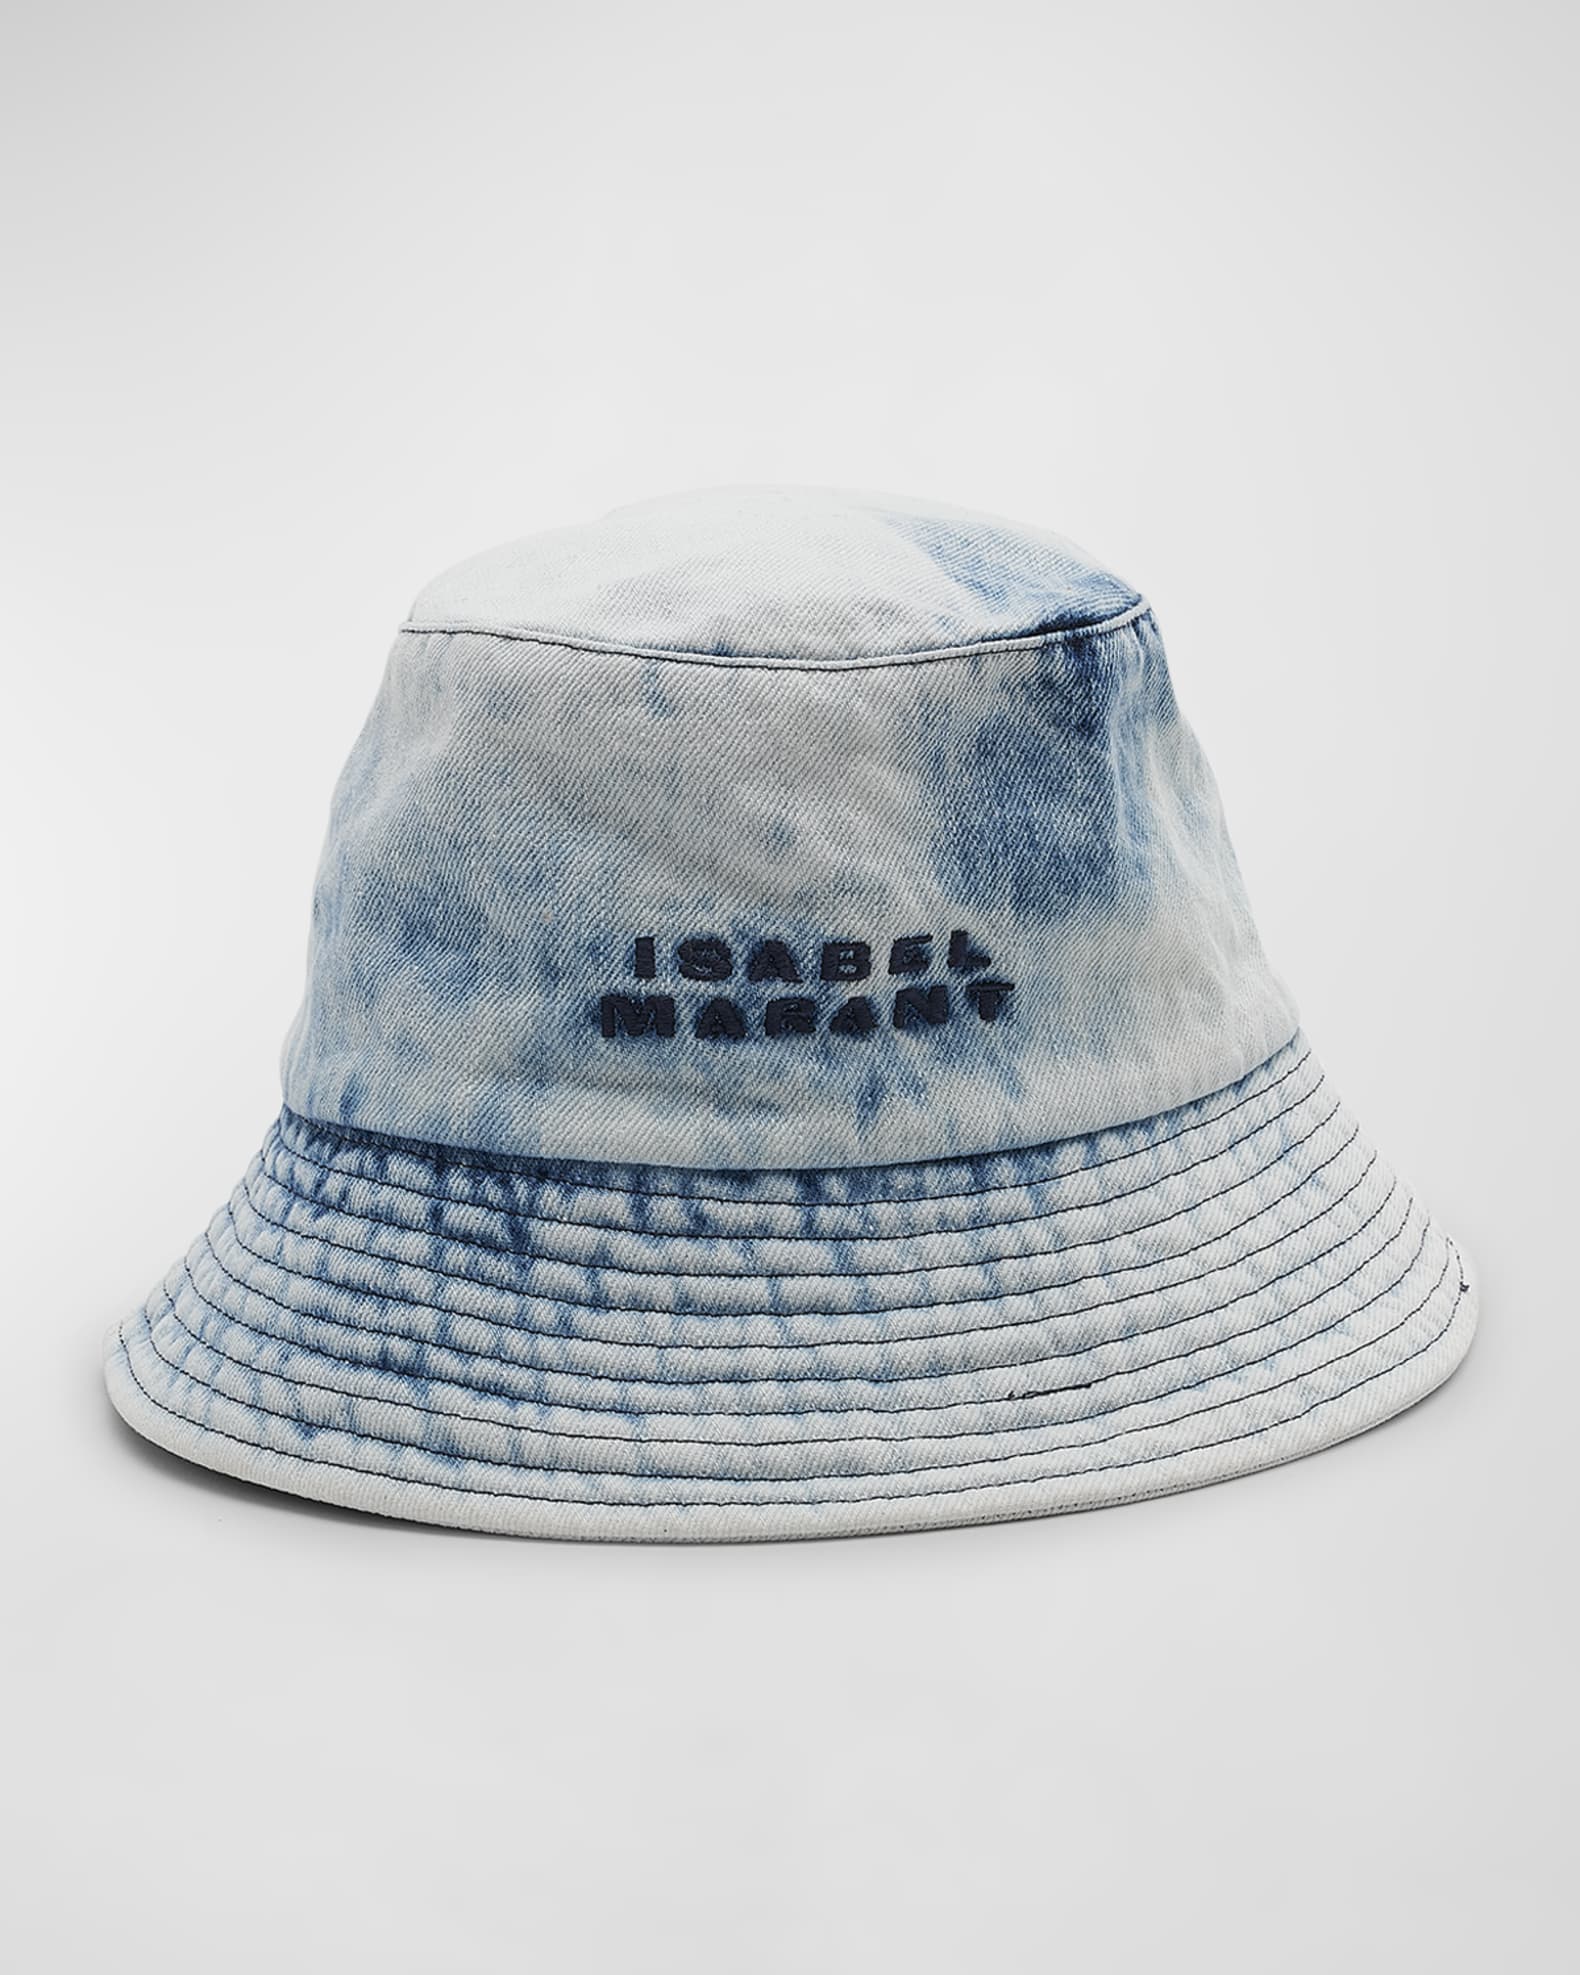 Isabel Marant hat in cotton